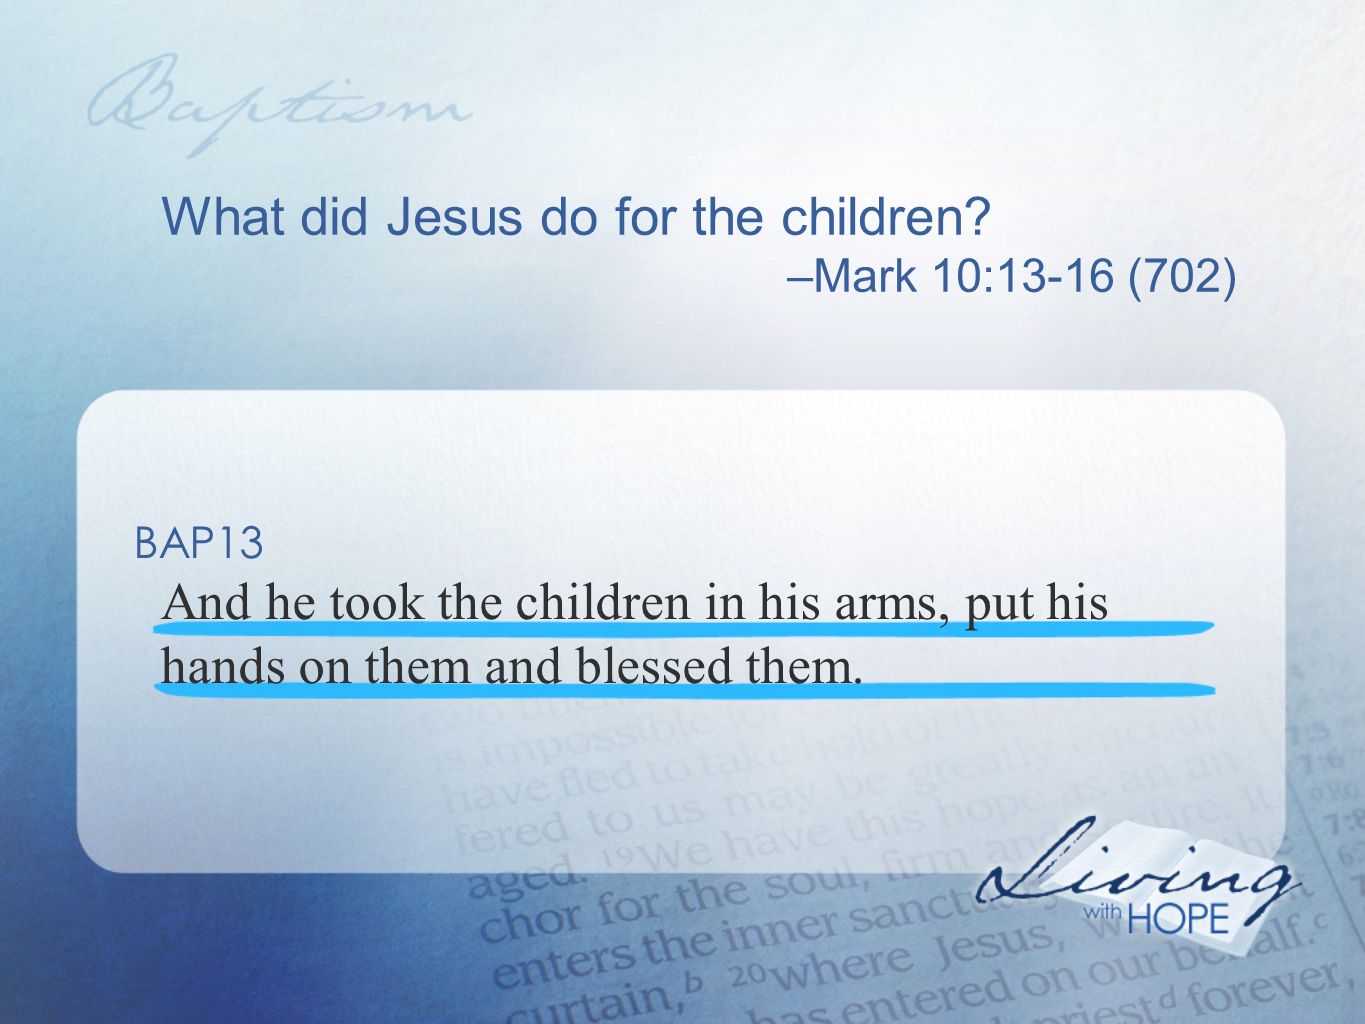 What did Jesus do for the children.